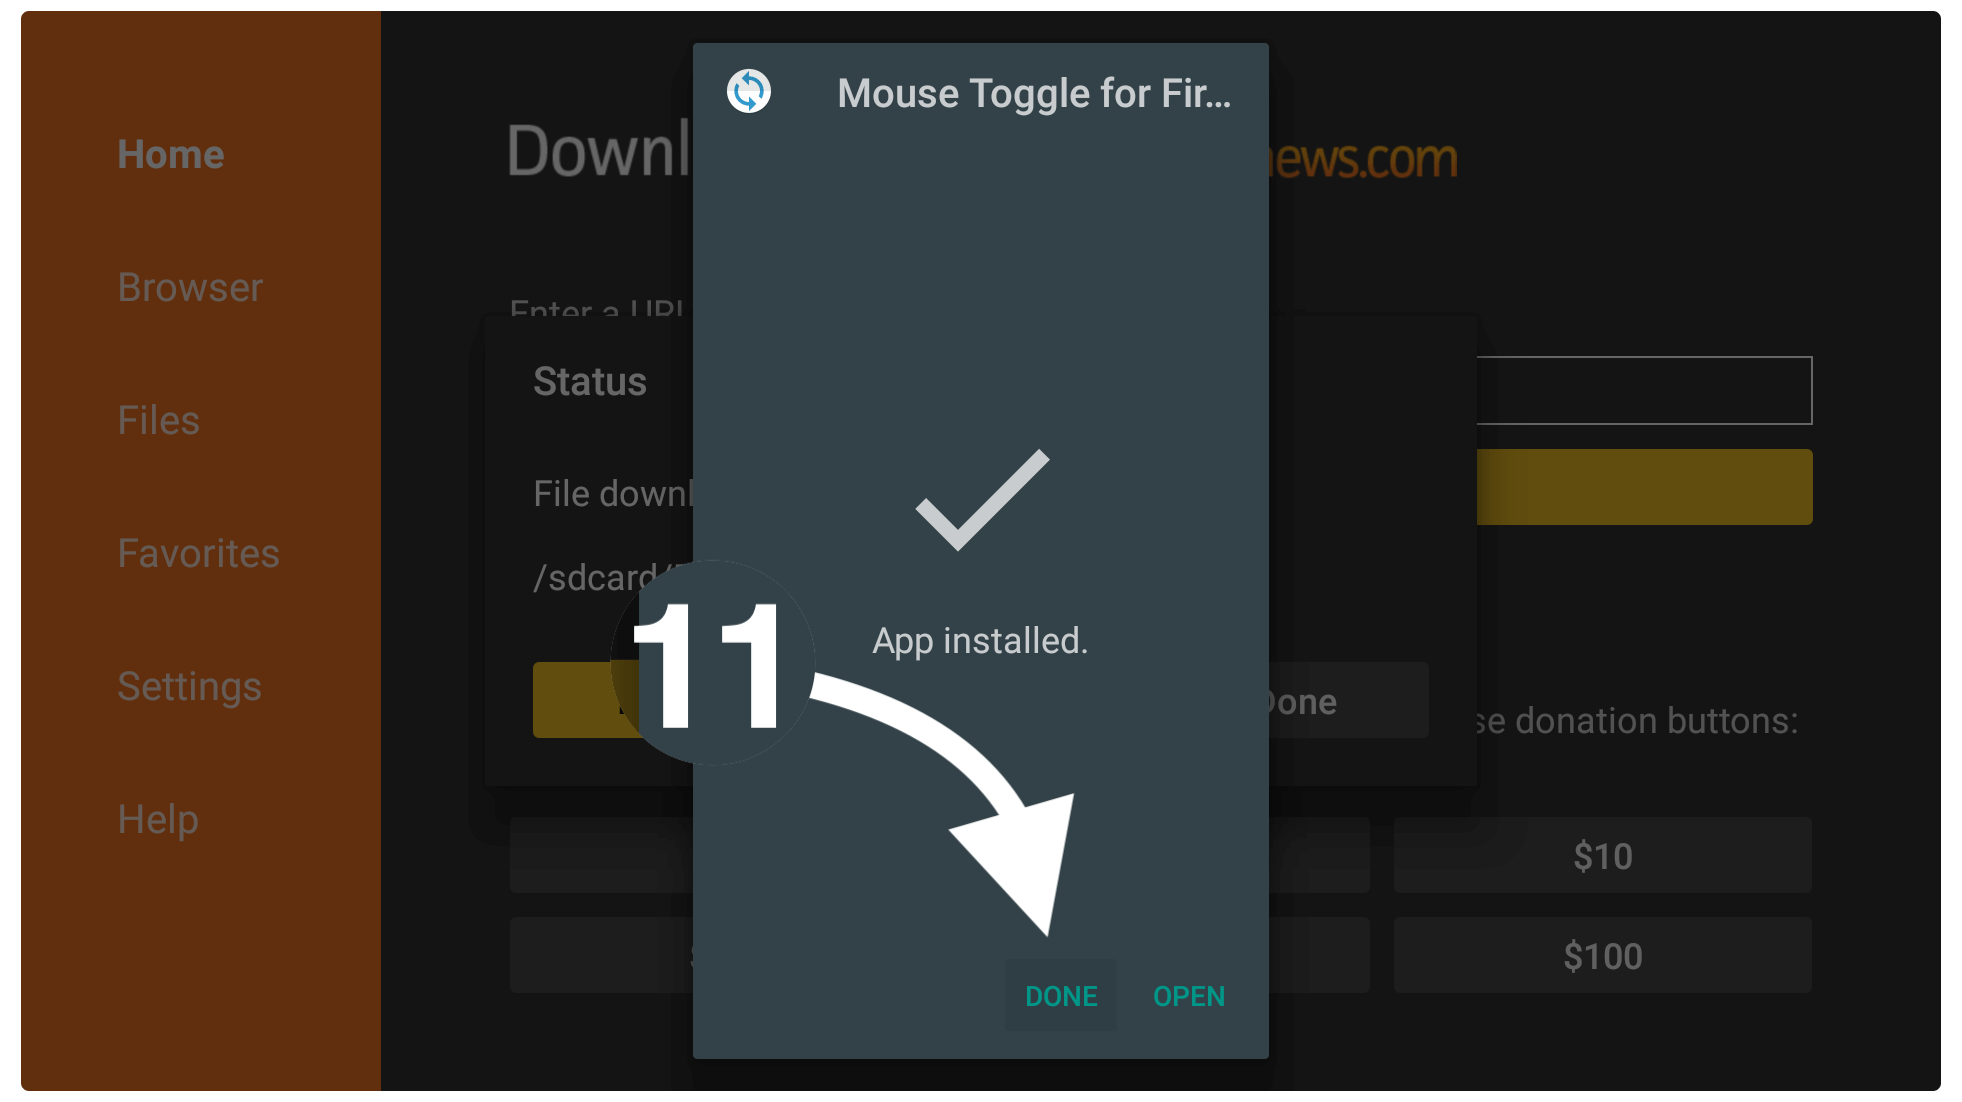 Download-Mouse-Toggle-For-Firestick